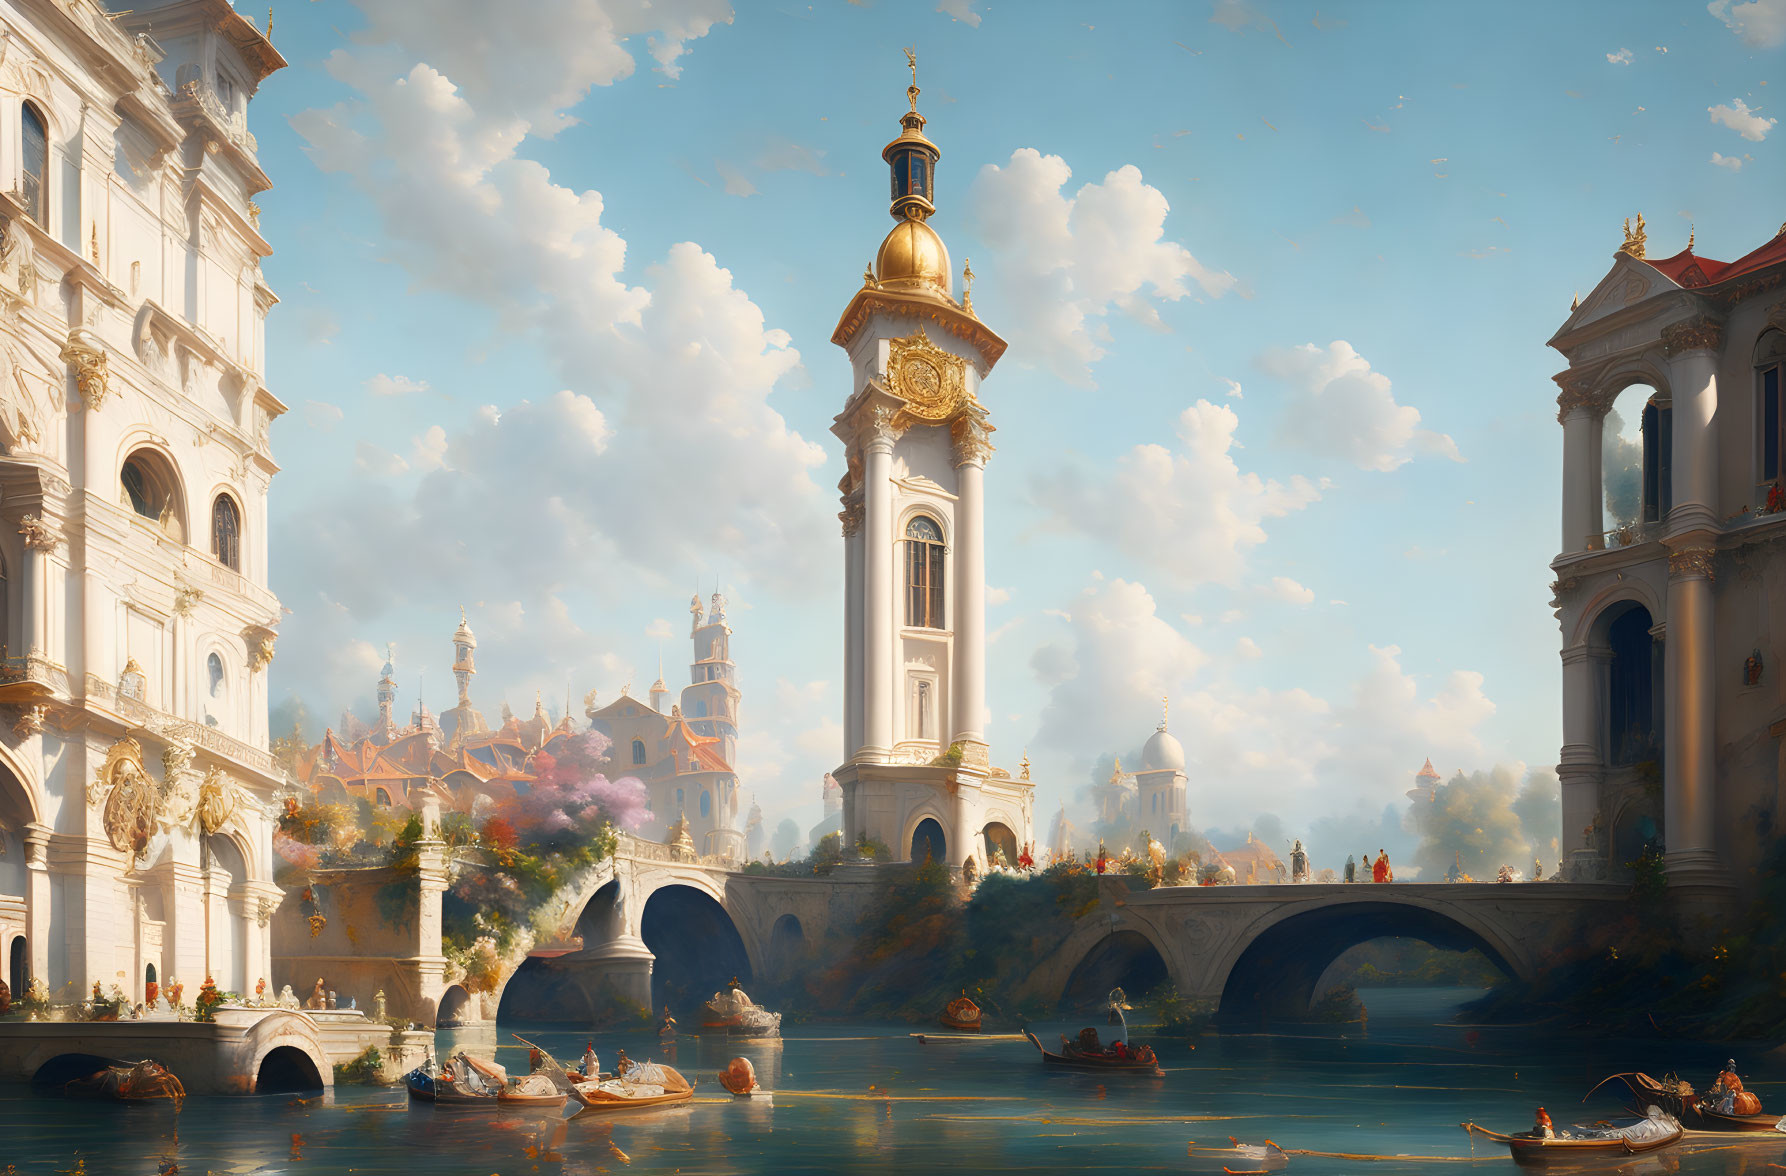 Baroque-style cityscape with clock tower, river, bridge, and cloudy sky